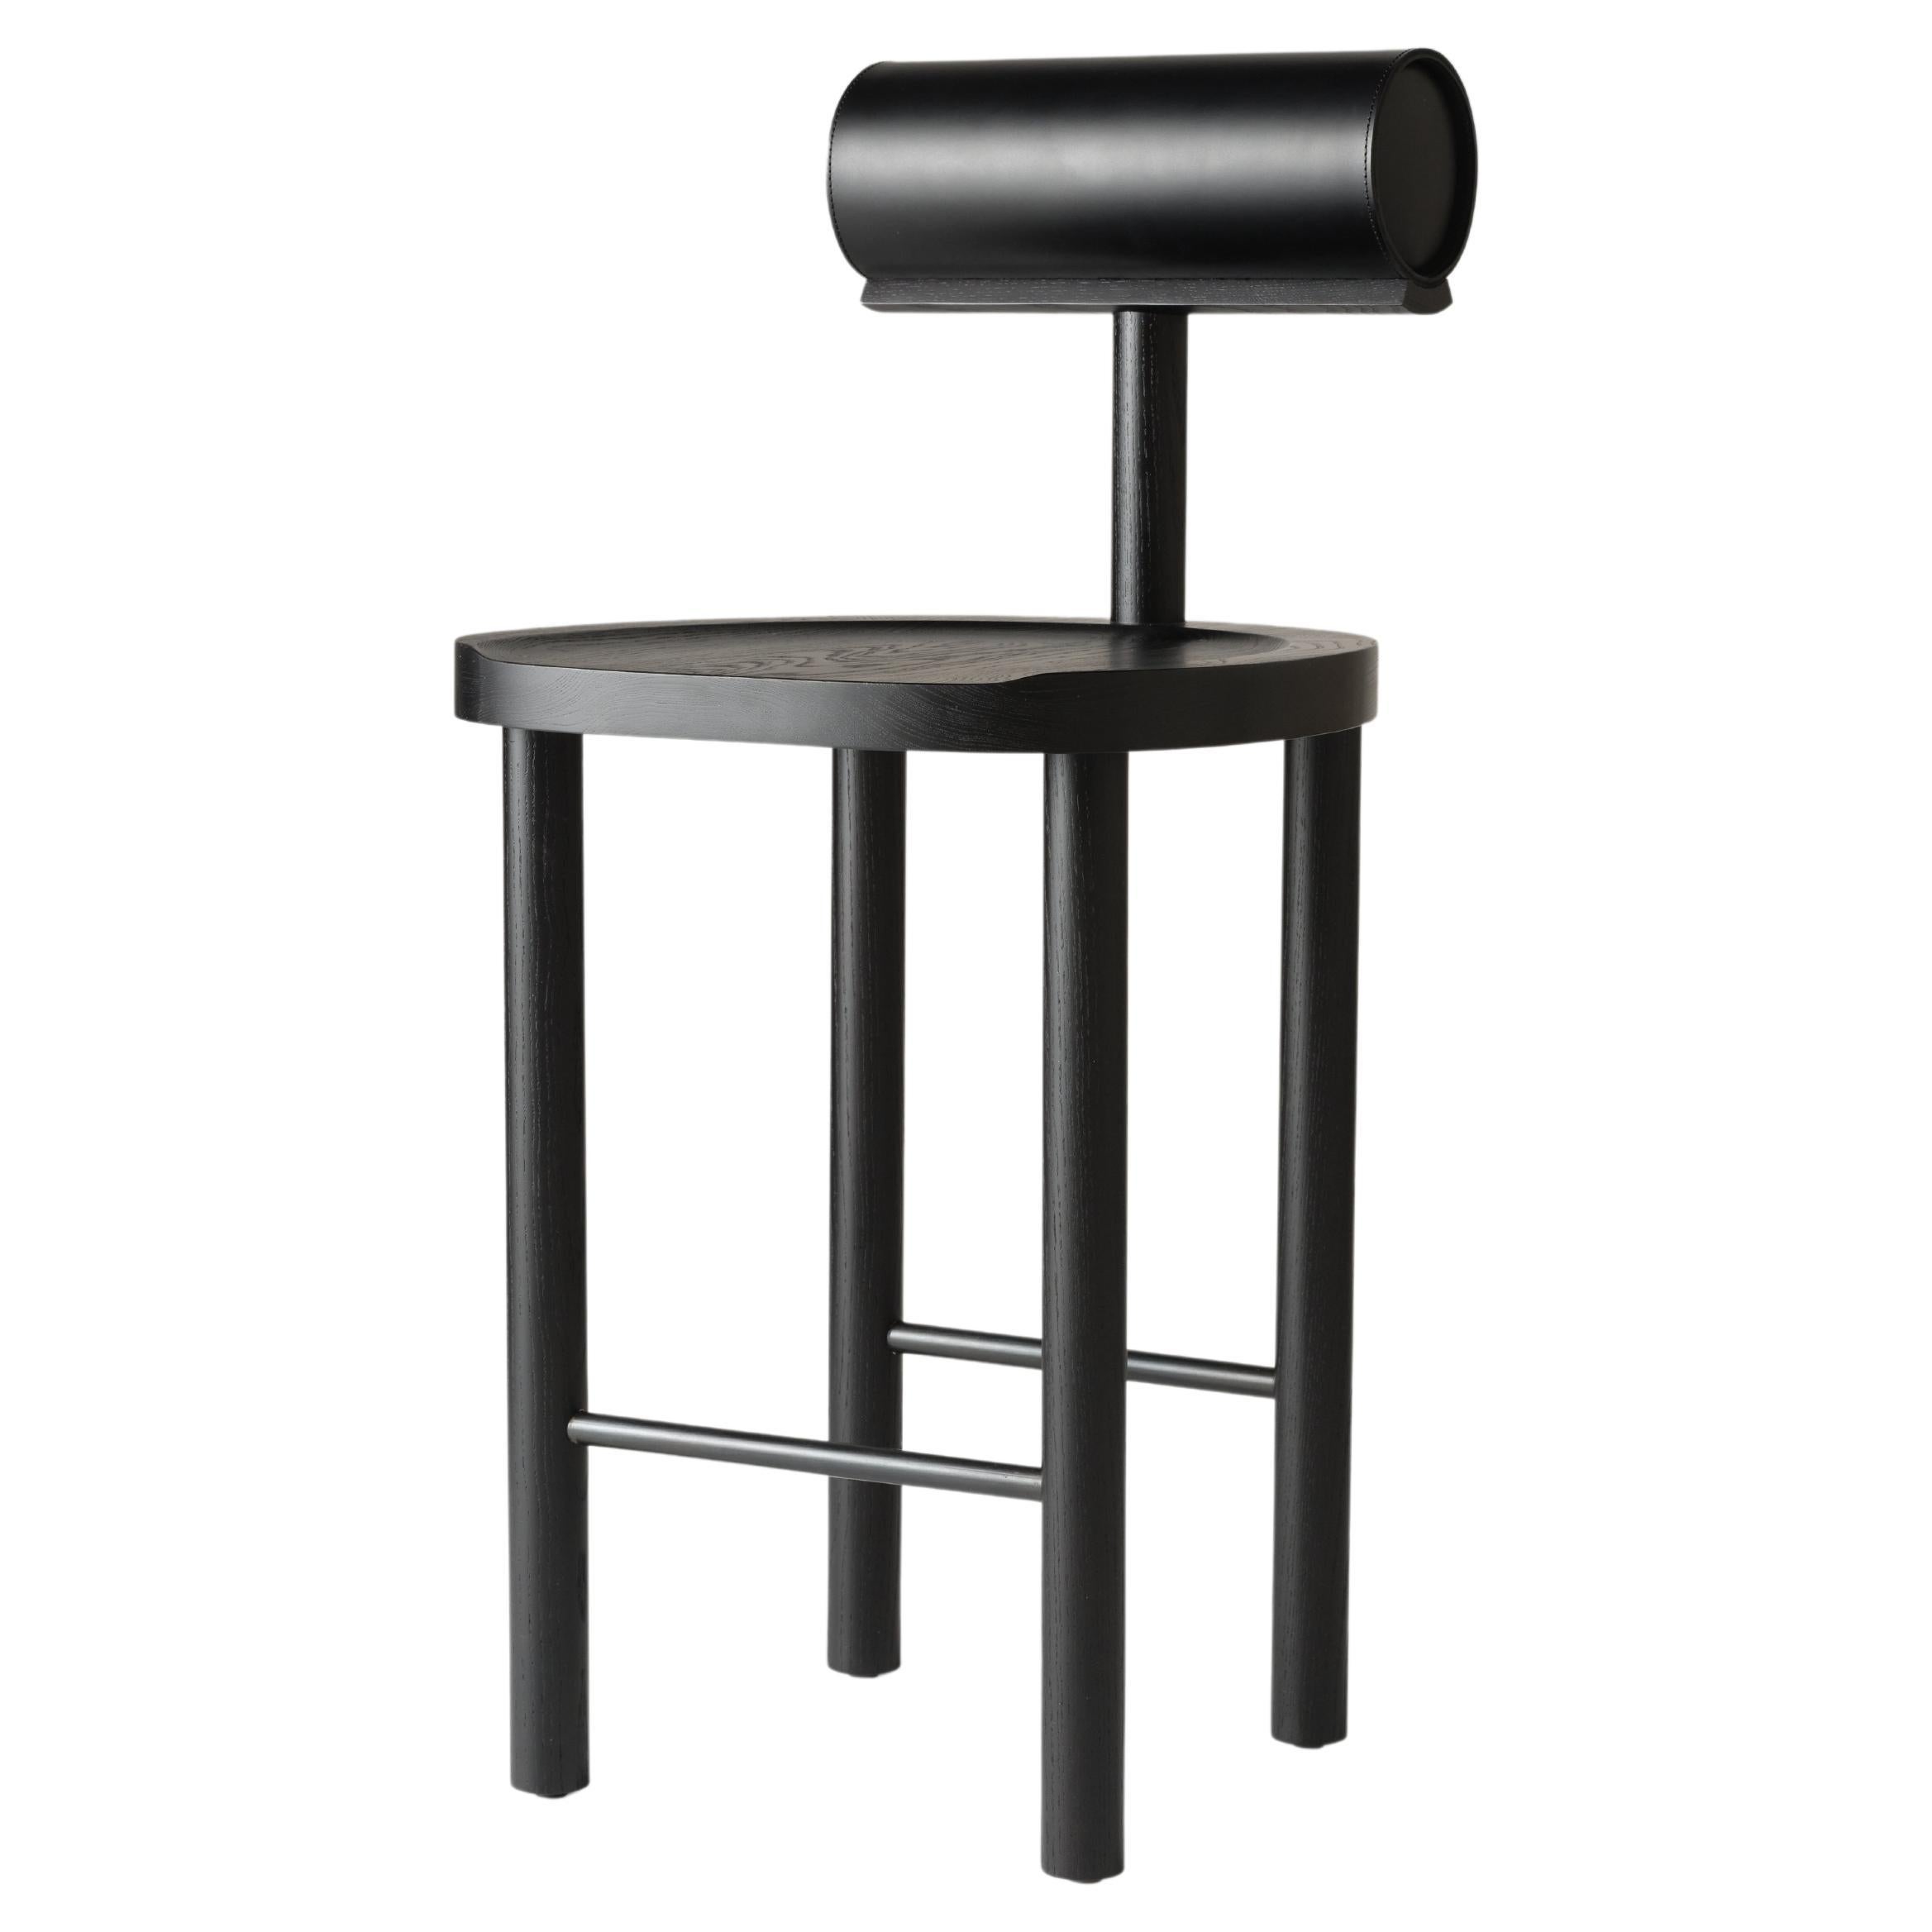 UNA Counter Stool in Black Stained Ash and Upholstered Back by Estudio Persona